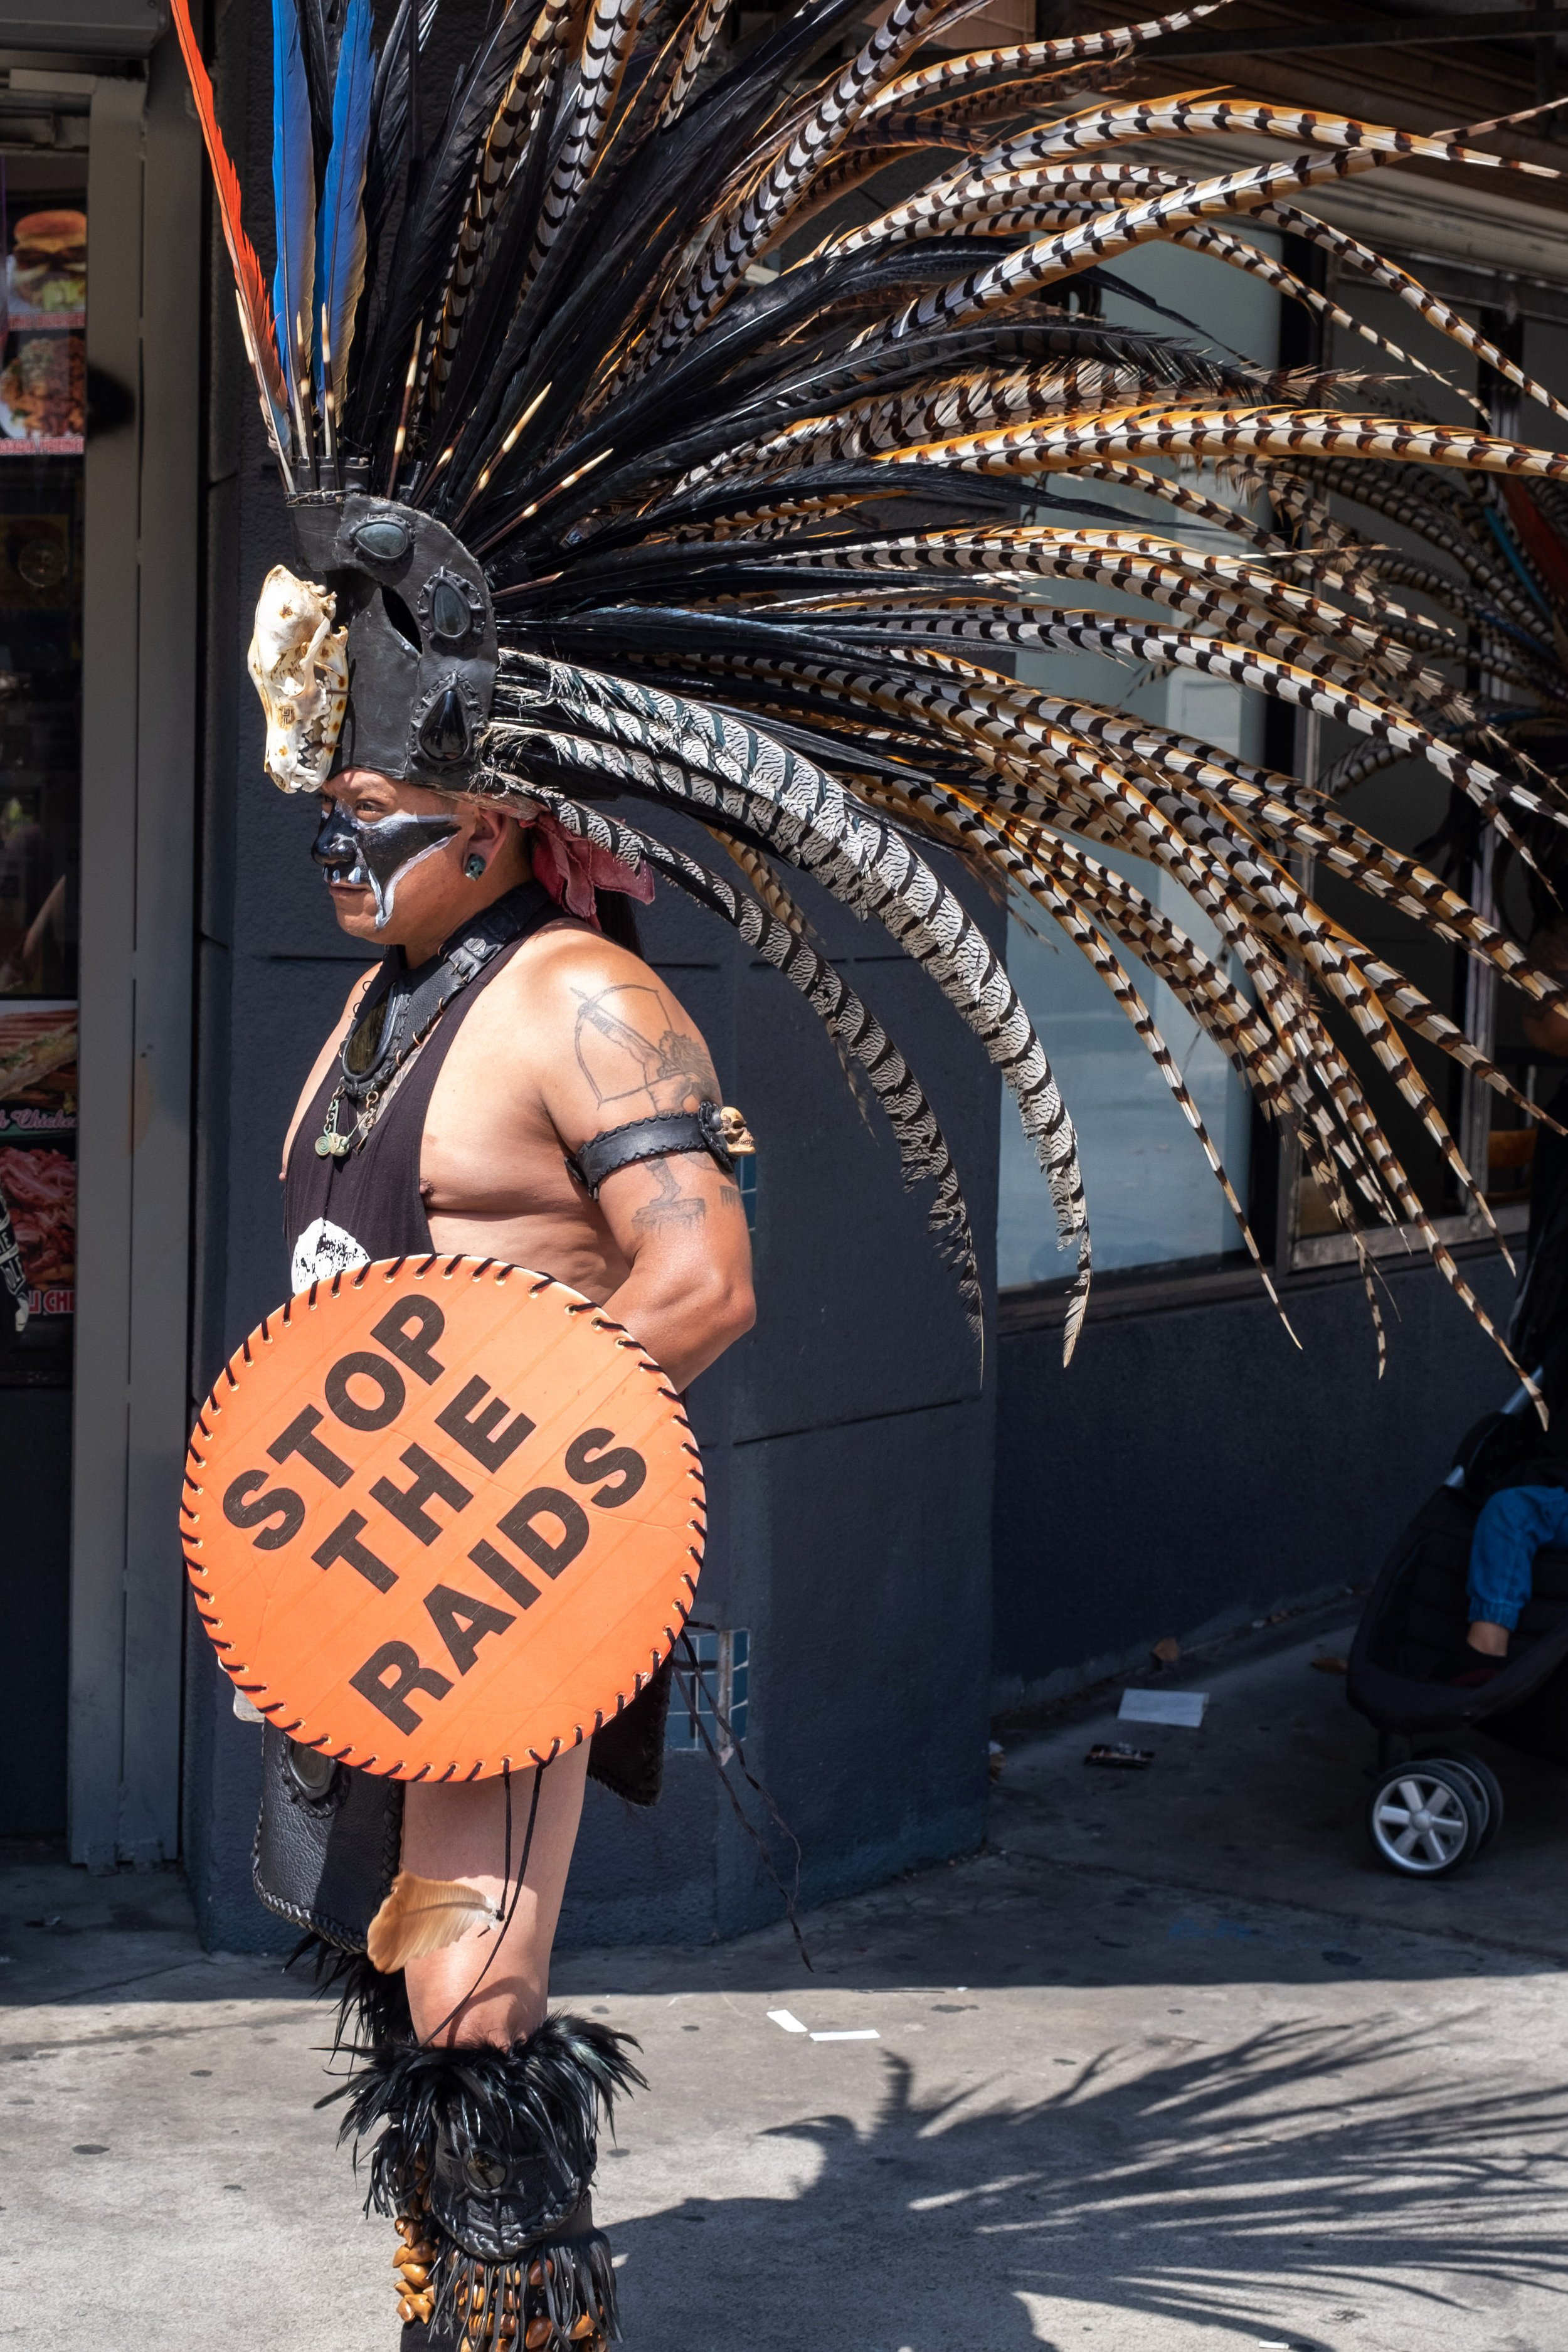  Tleyotl is an Aztec dancer from Mexico, who normally performs in Torrance, but showed up to support street vendor workers at the May Day March. Broadway & Olympic Blvd in Los Angeles, on Sunday, May 1, 2022. (Anna Sophia Moltke | The Corsair) 